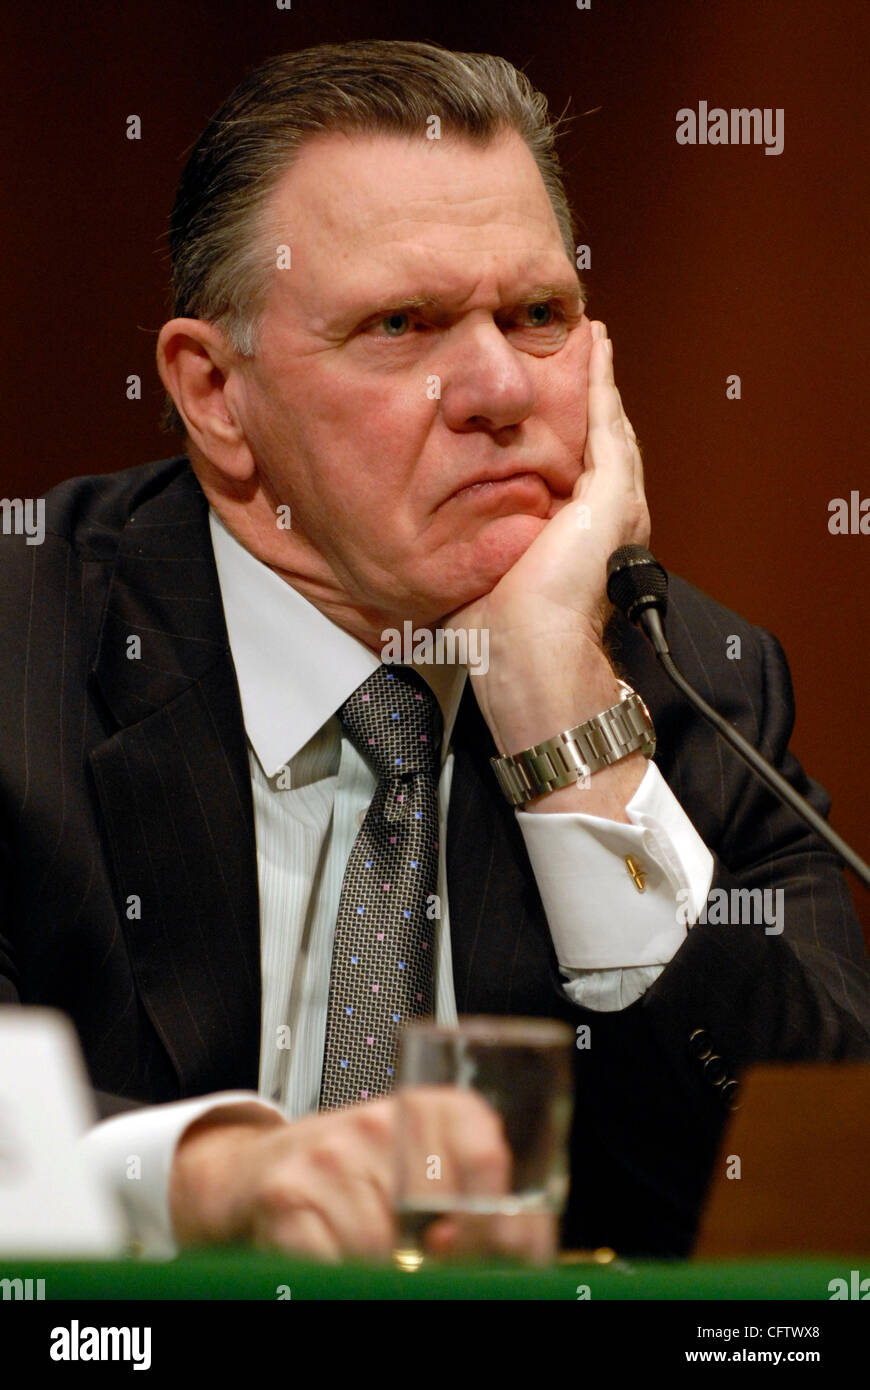 Jan 25, 2007 - Washington, DC, USA - Retired General JOHN KEANE, former vice chief of staff for the Army, listens to questions from Carl Levin (D-MI), chairman of the Senate Armed Services committee, during a hearing on US options in the Iraq war. Stock Photo